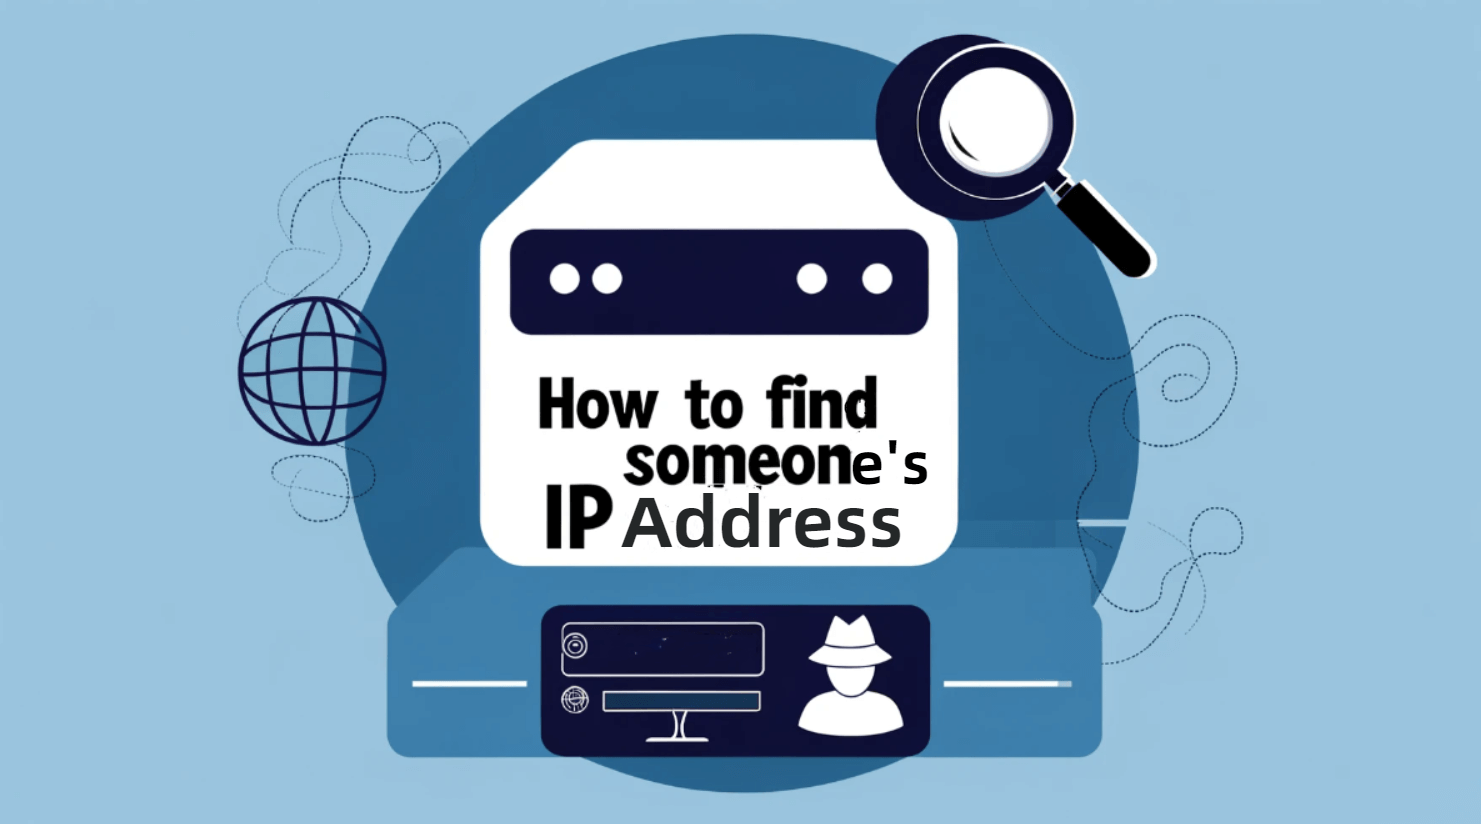 What is an IP Address